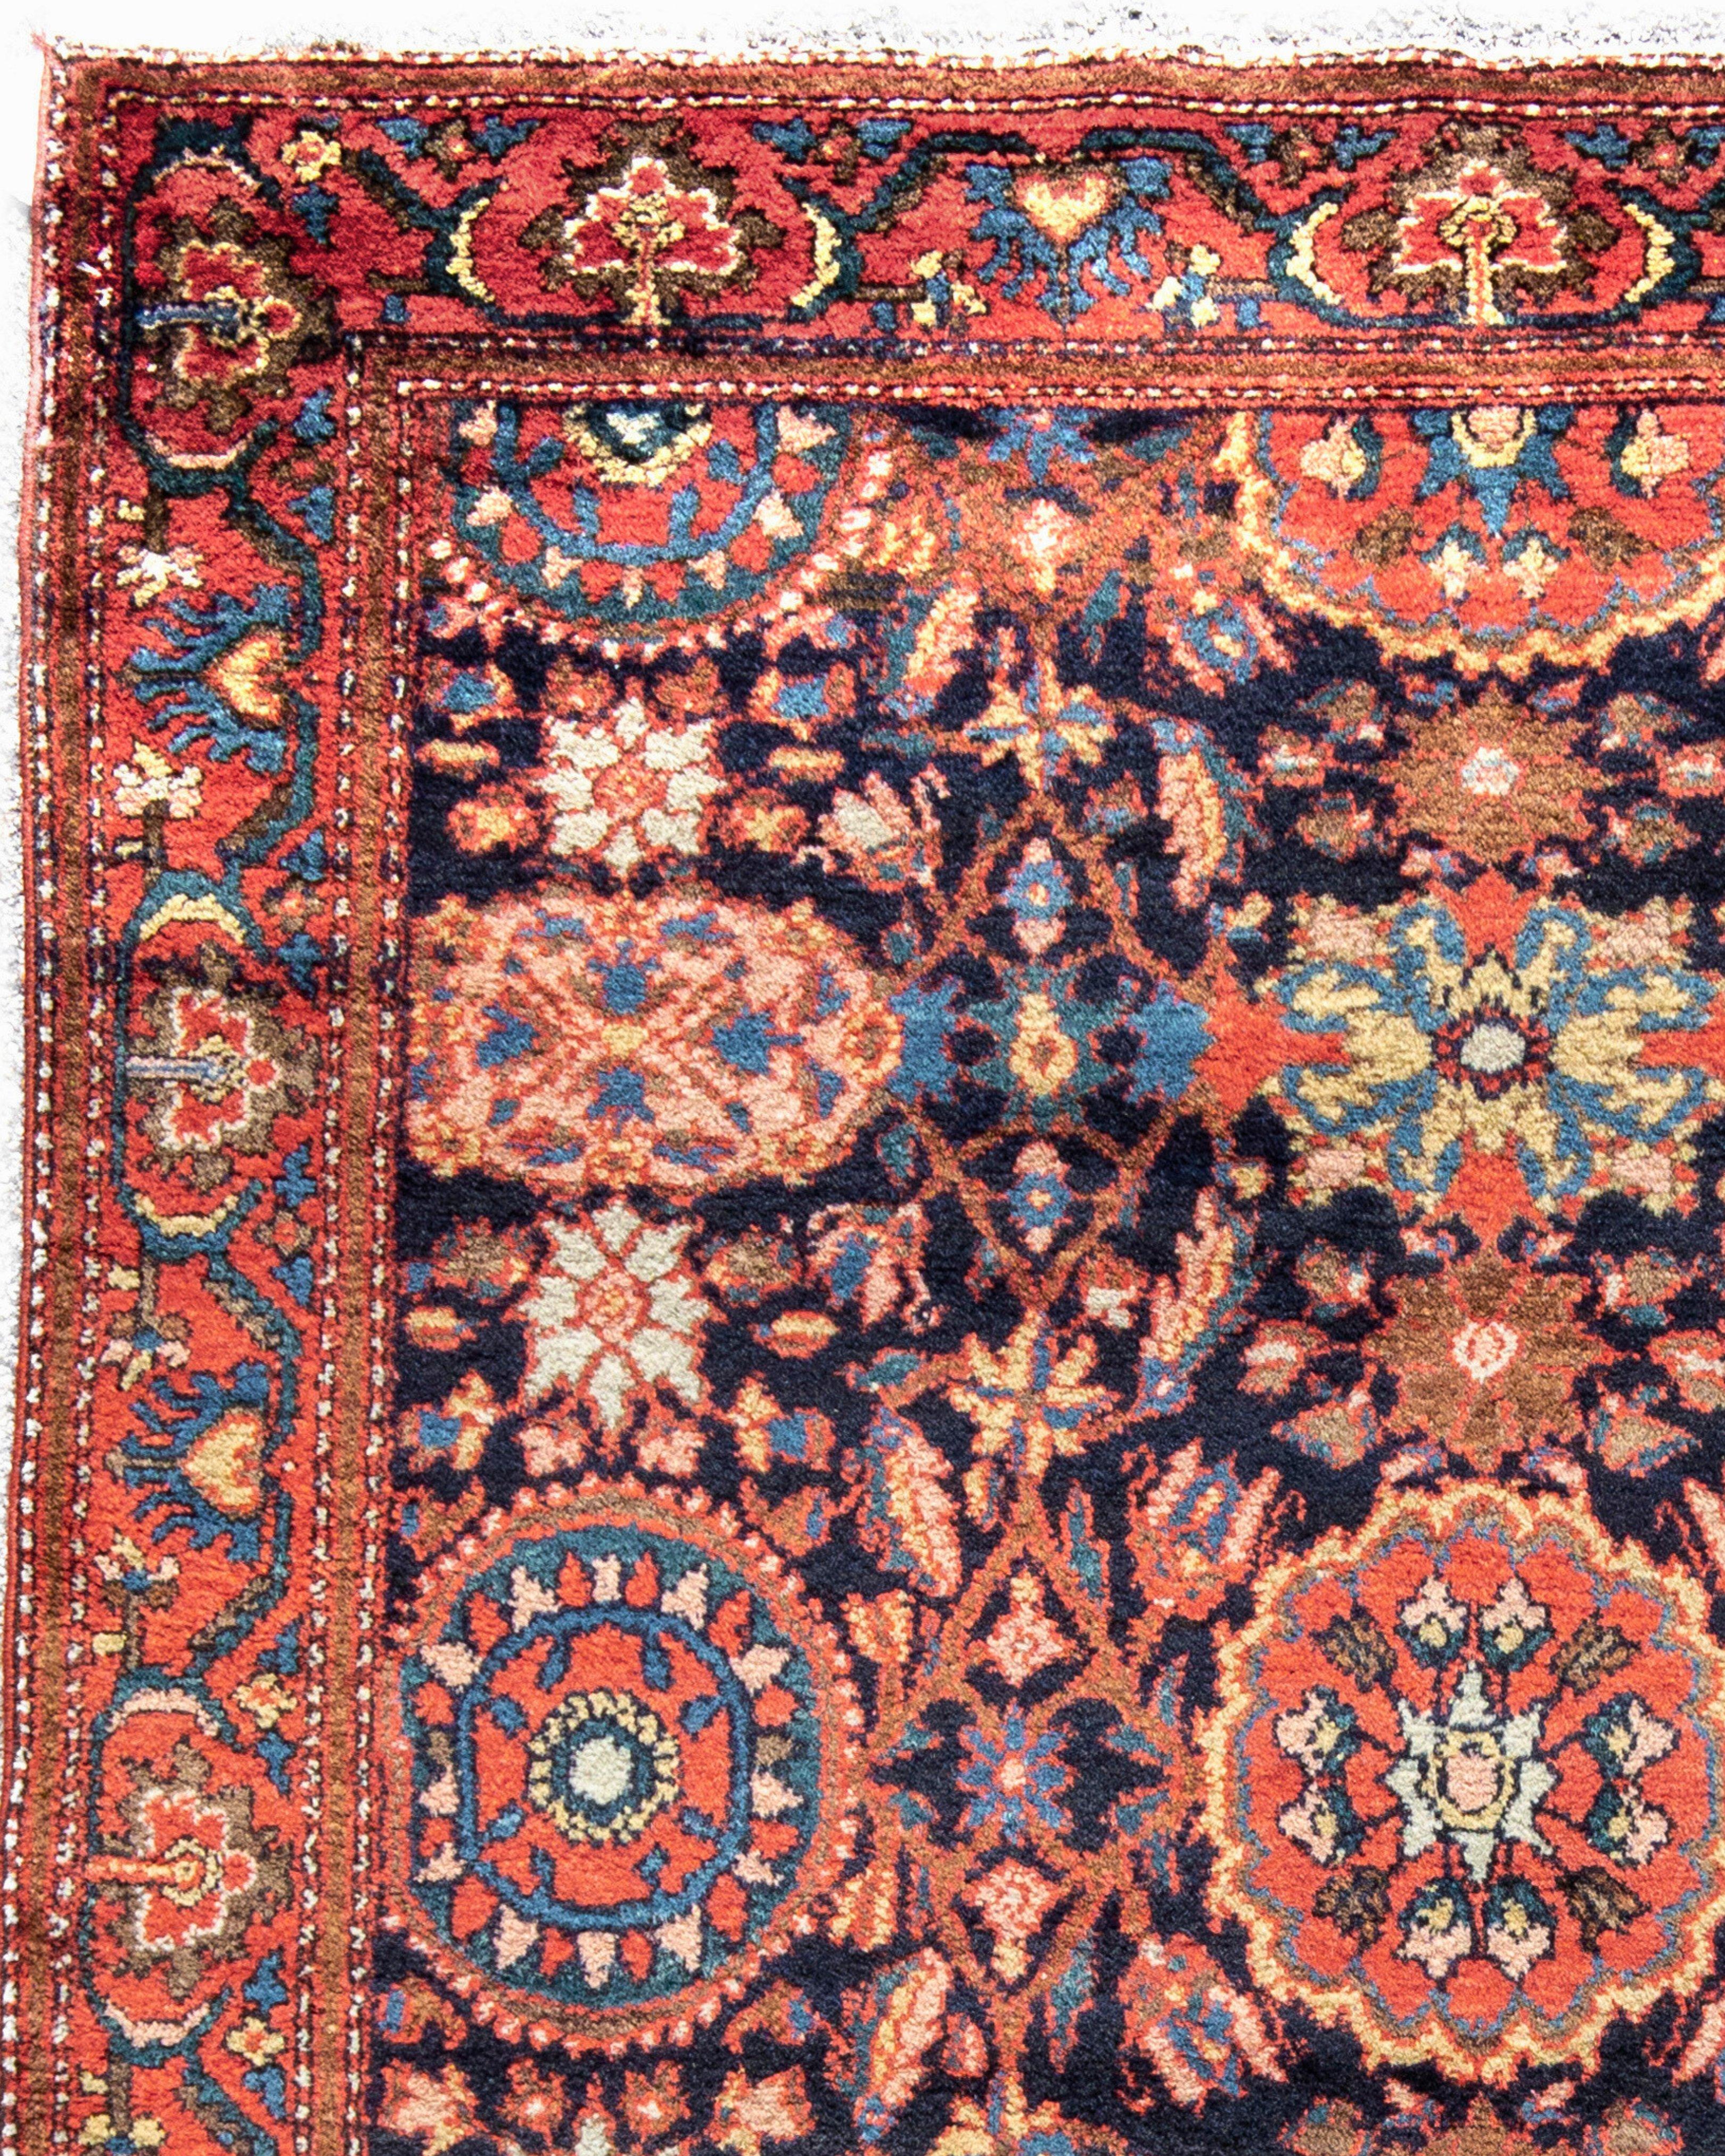 Hand-Woven Antique Persian Malayer Rug, c. 1900 For Sale